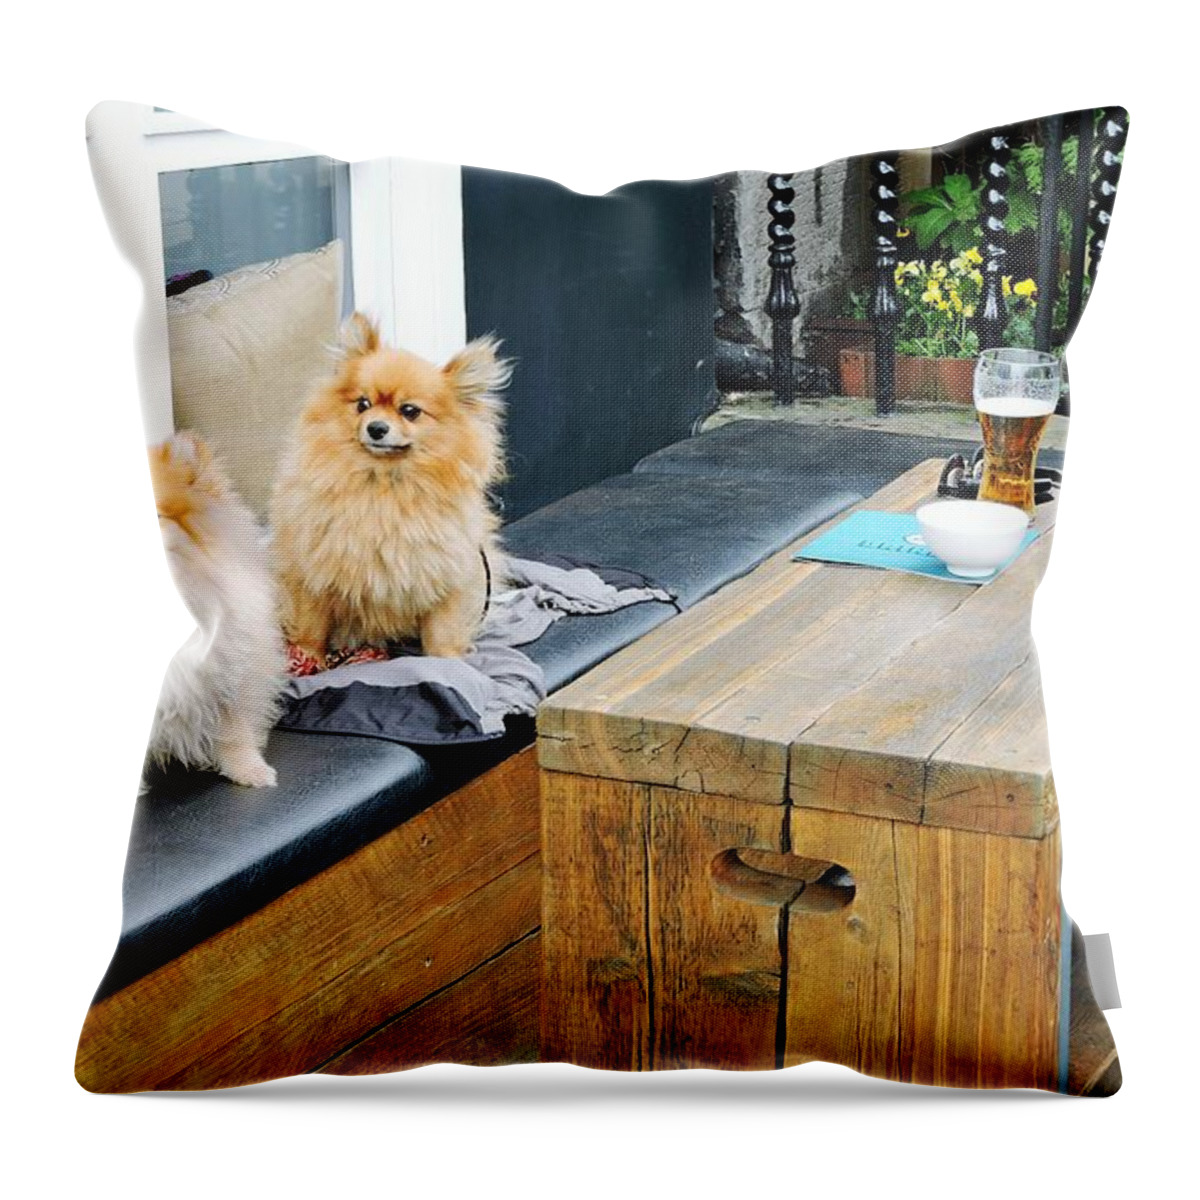 Pomeranian Throw Pillow featuring the photograph Two Pomeranians by William Slider